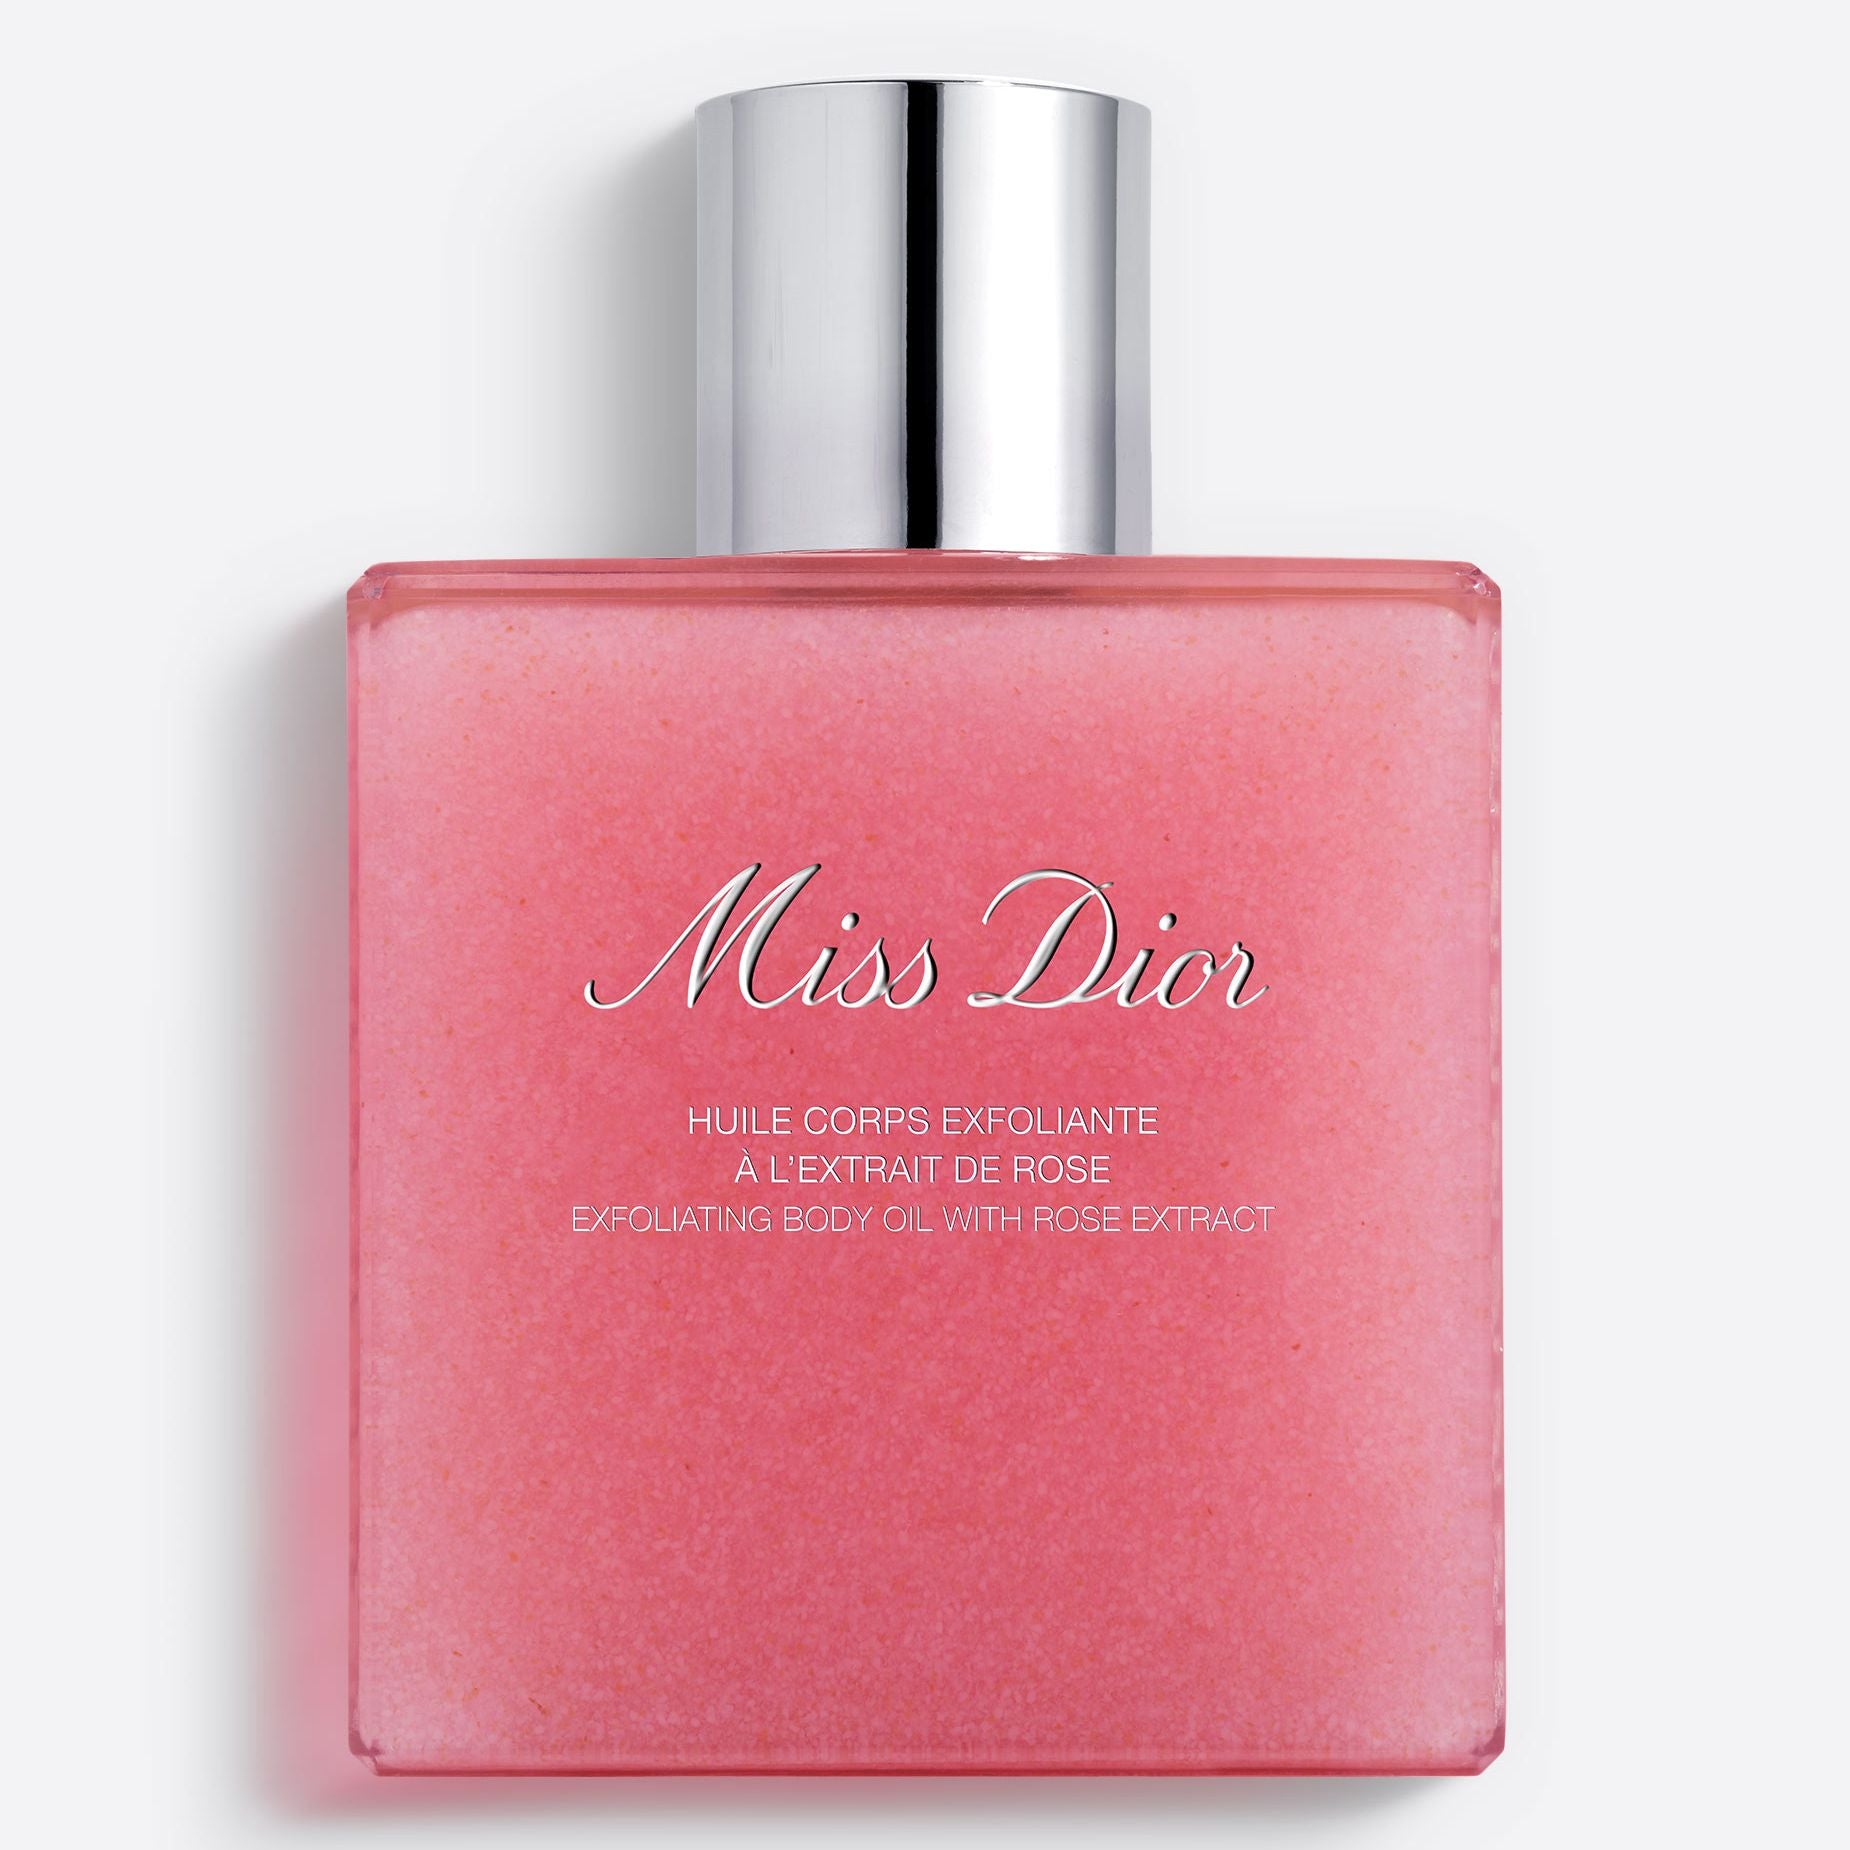 MISS DIOR EXFOLIATING BODY OIL WITH ROSE EXTRACT ~ Exfoliating Body Oil